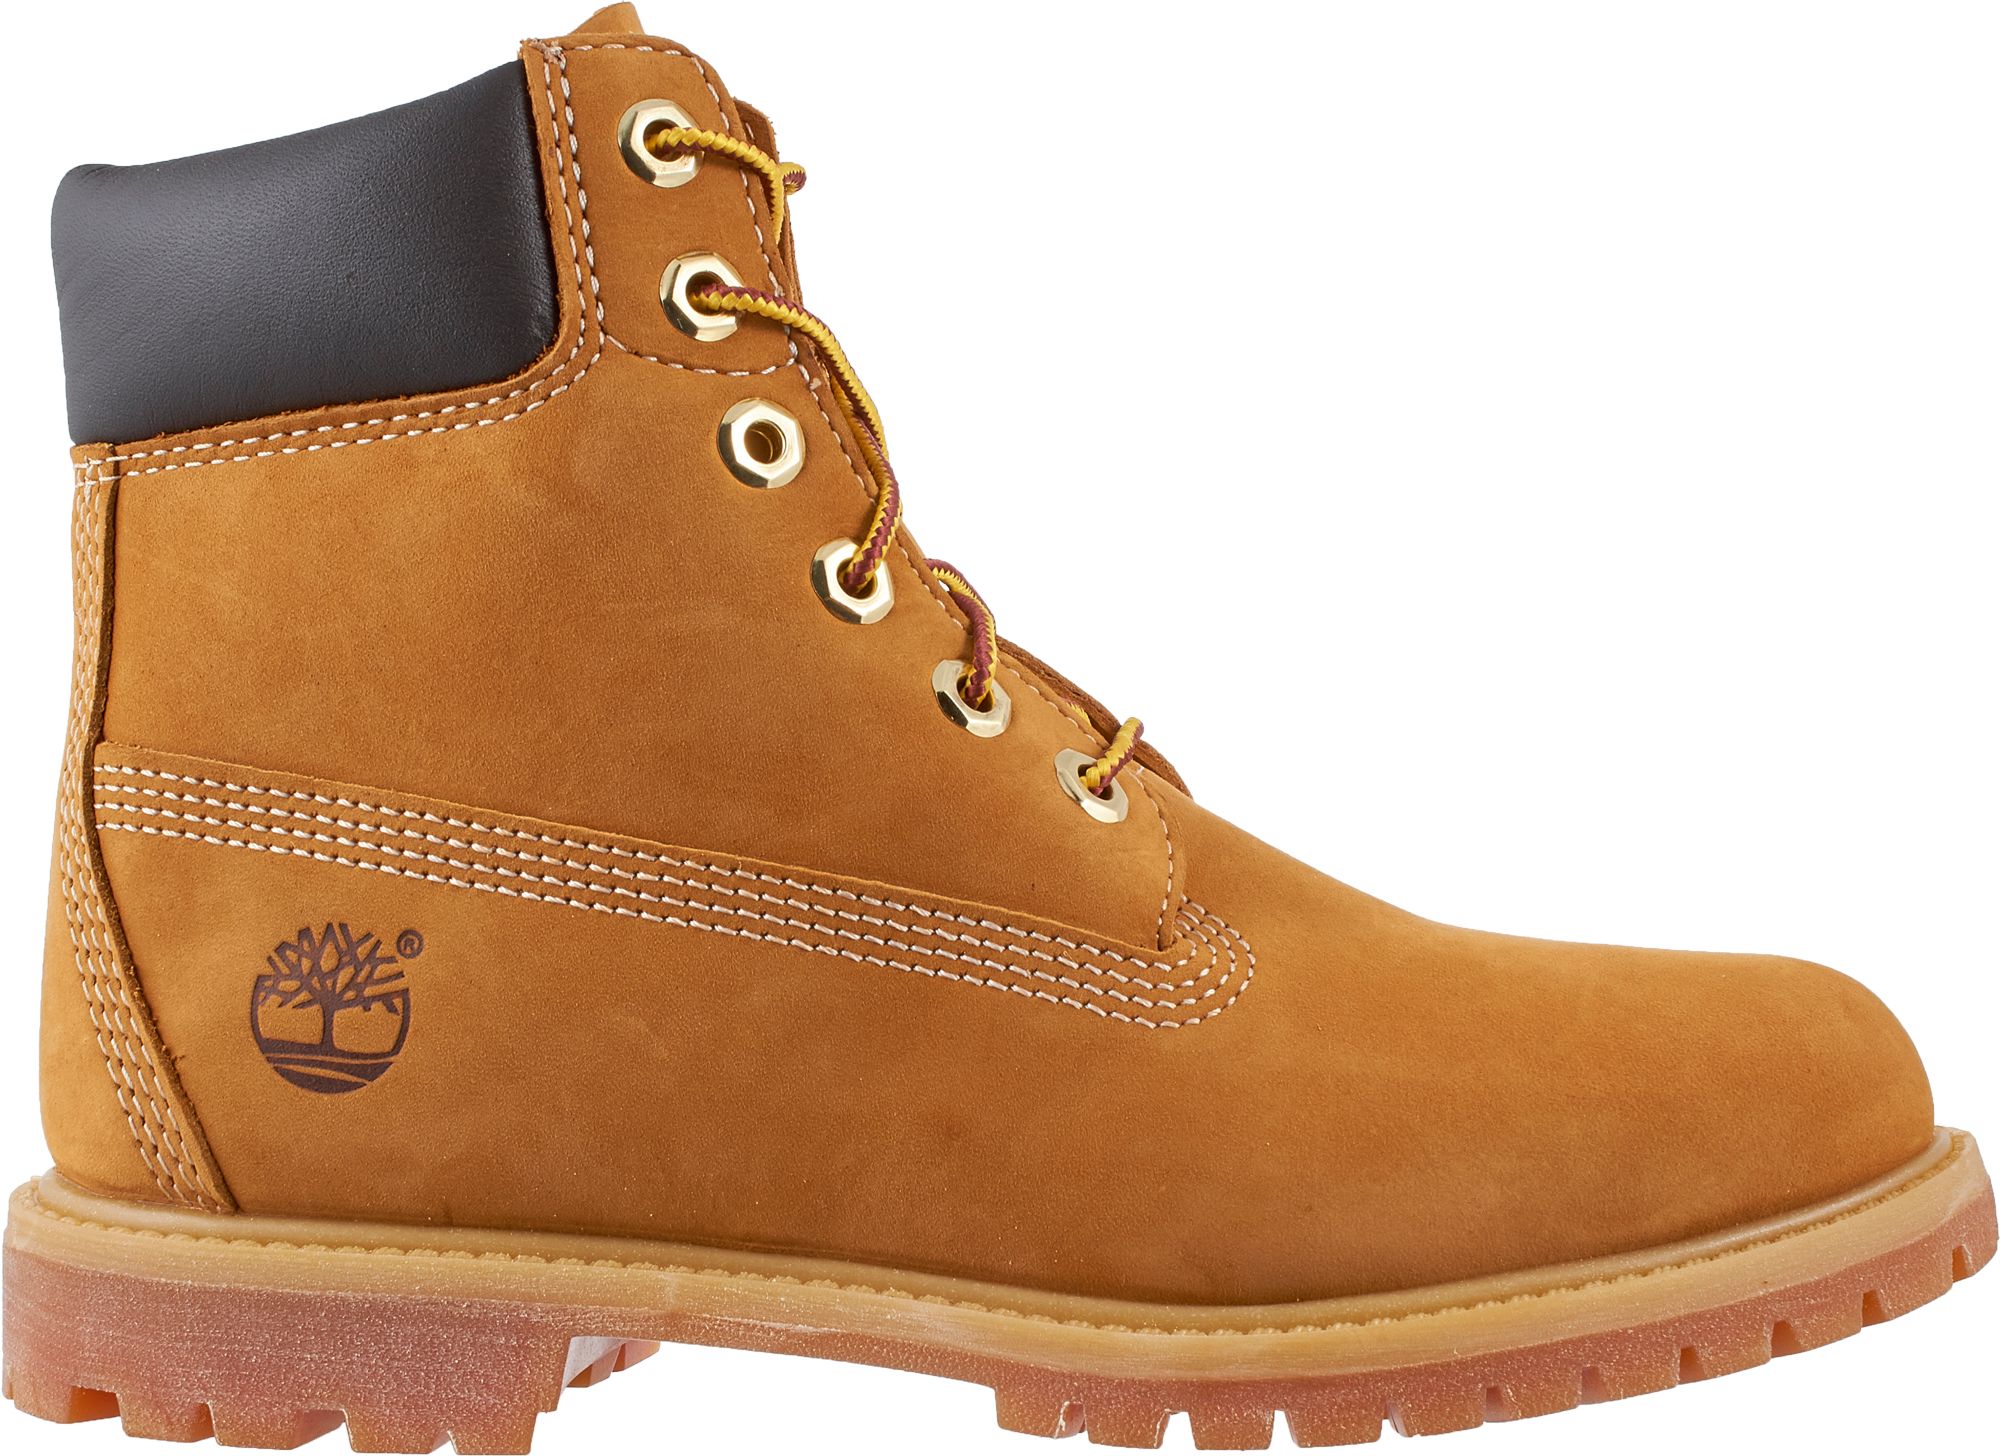 cheapest place to get timberland boots